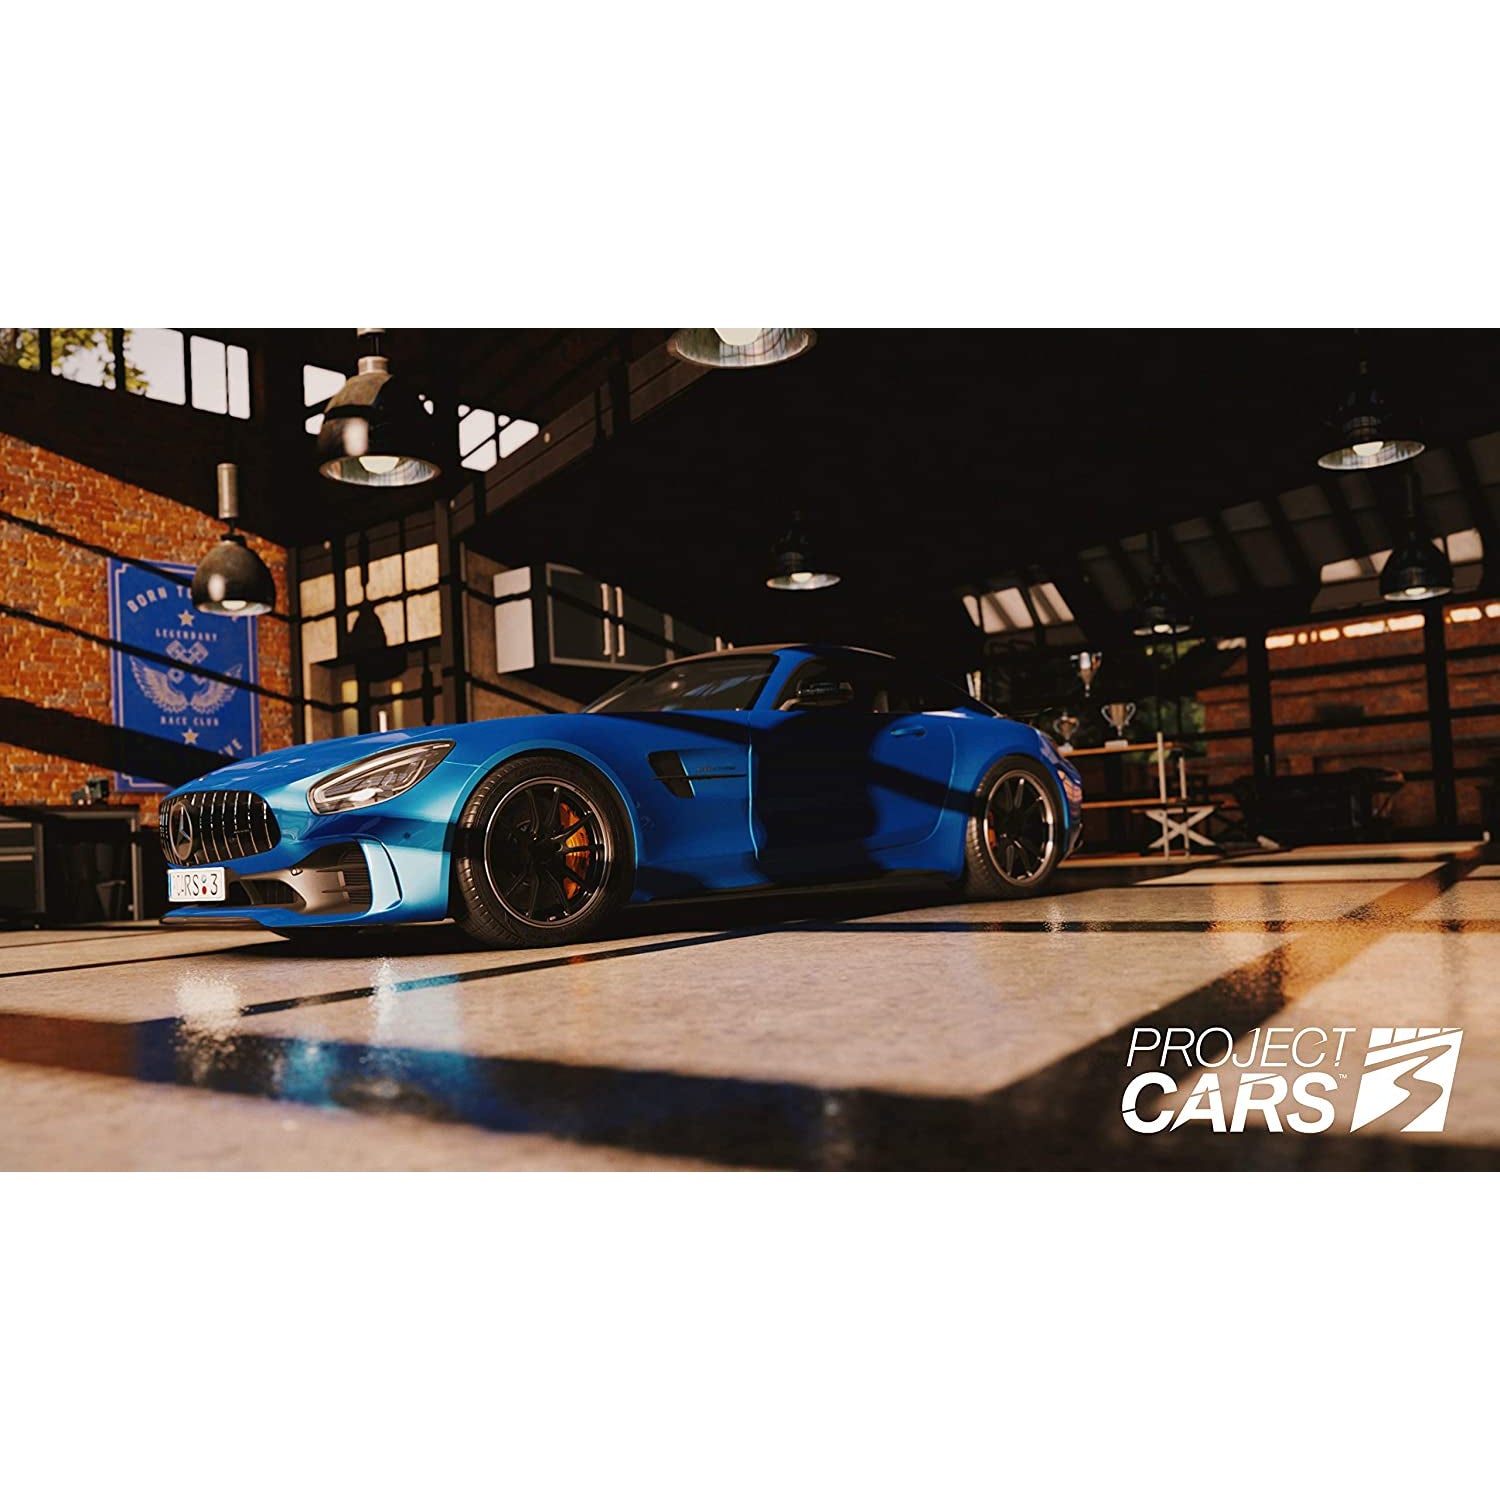 Project Cars 3 (Xbox One), Video Game for Xbox One